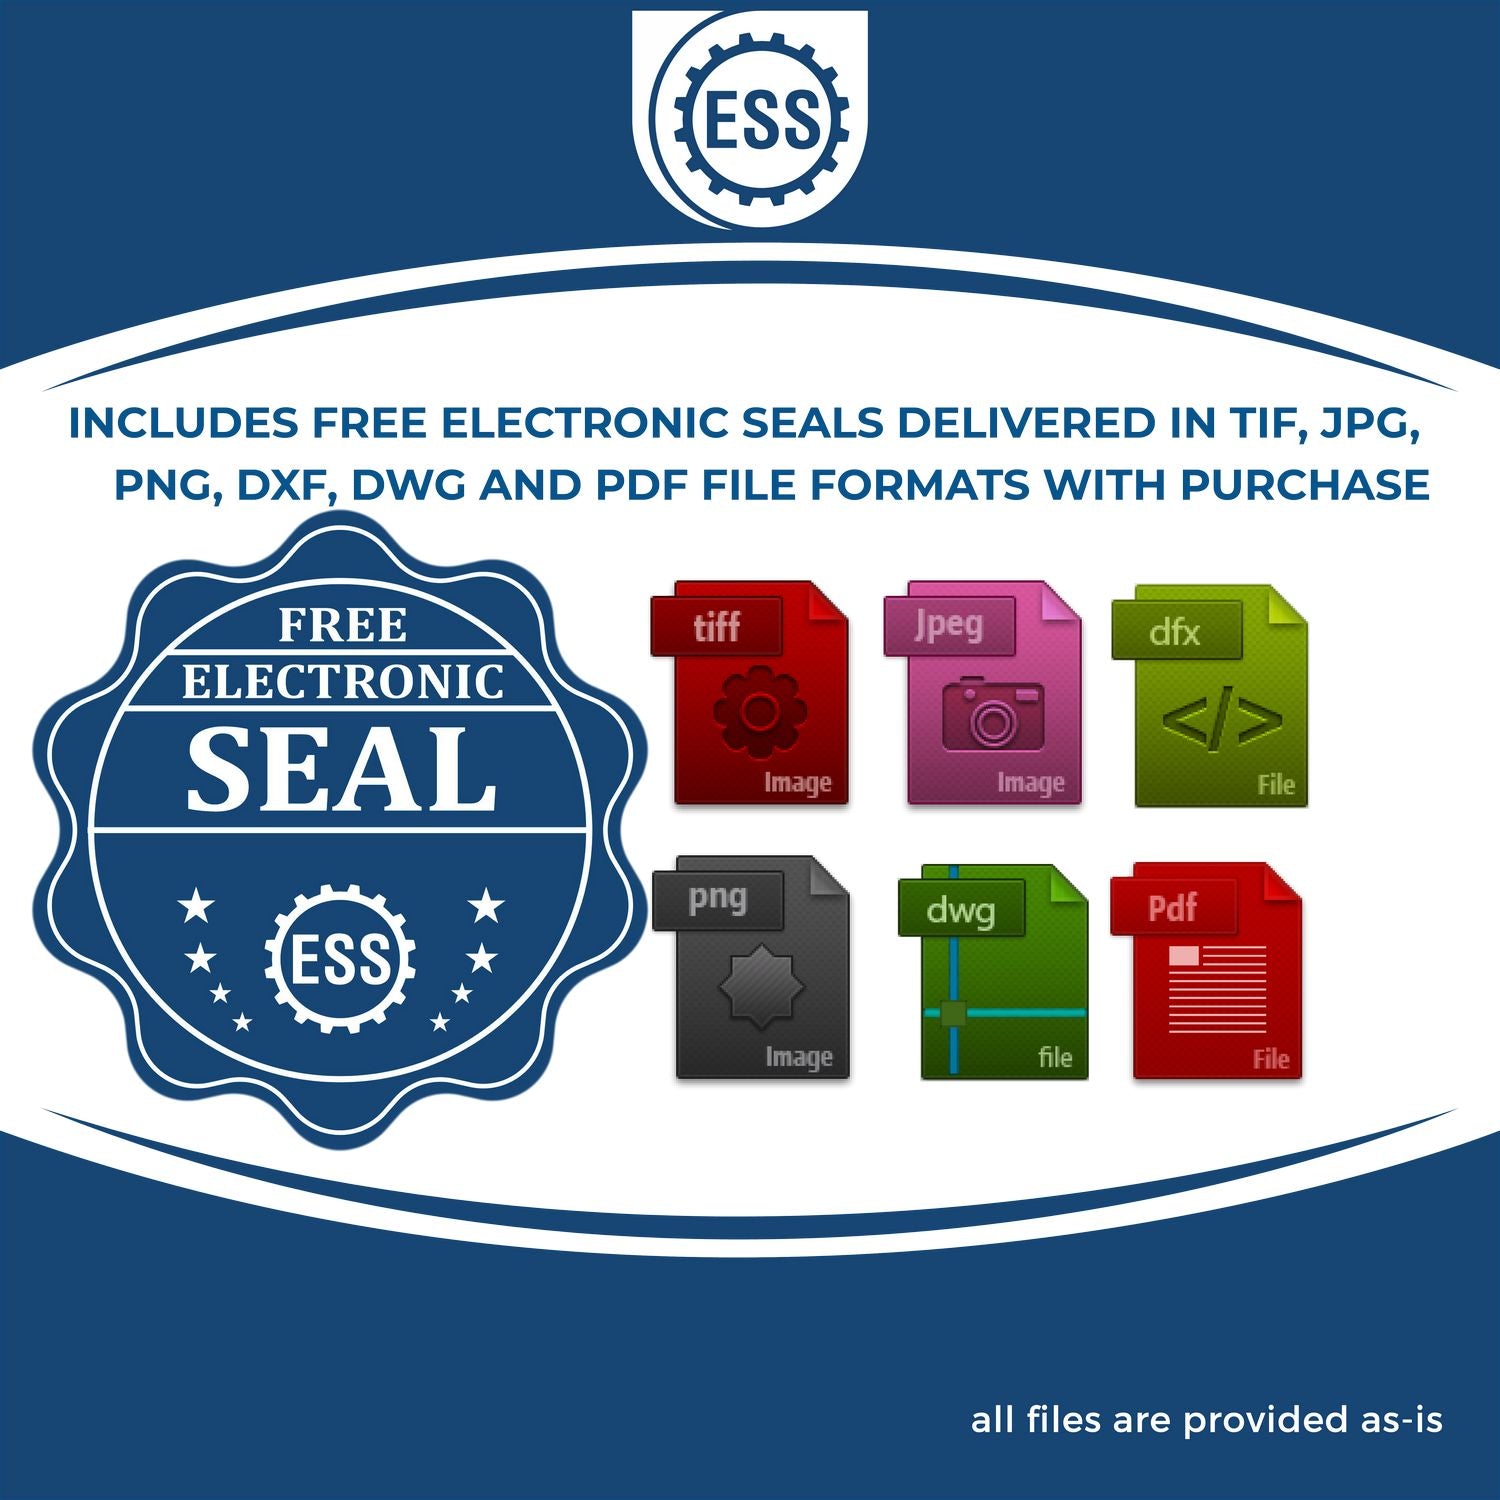 An infographic for the free electronic seal for the Long Reach Virginia Land Surveyor Seal illustrating the different file type icons such as DXF, DWG, TIF, JPG and PNG.